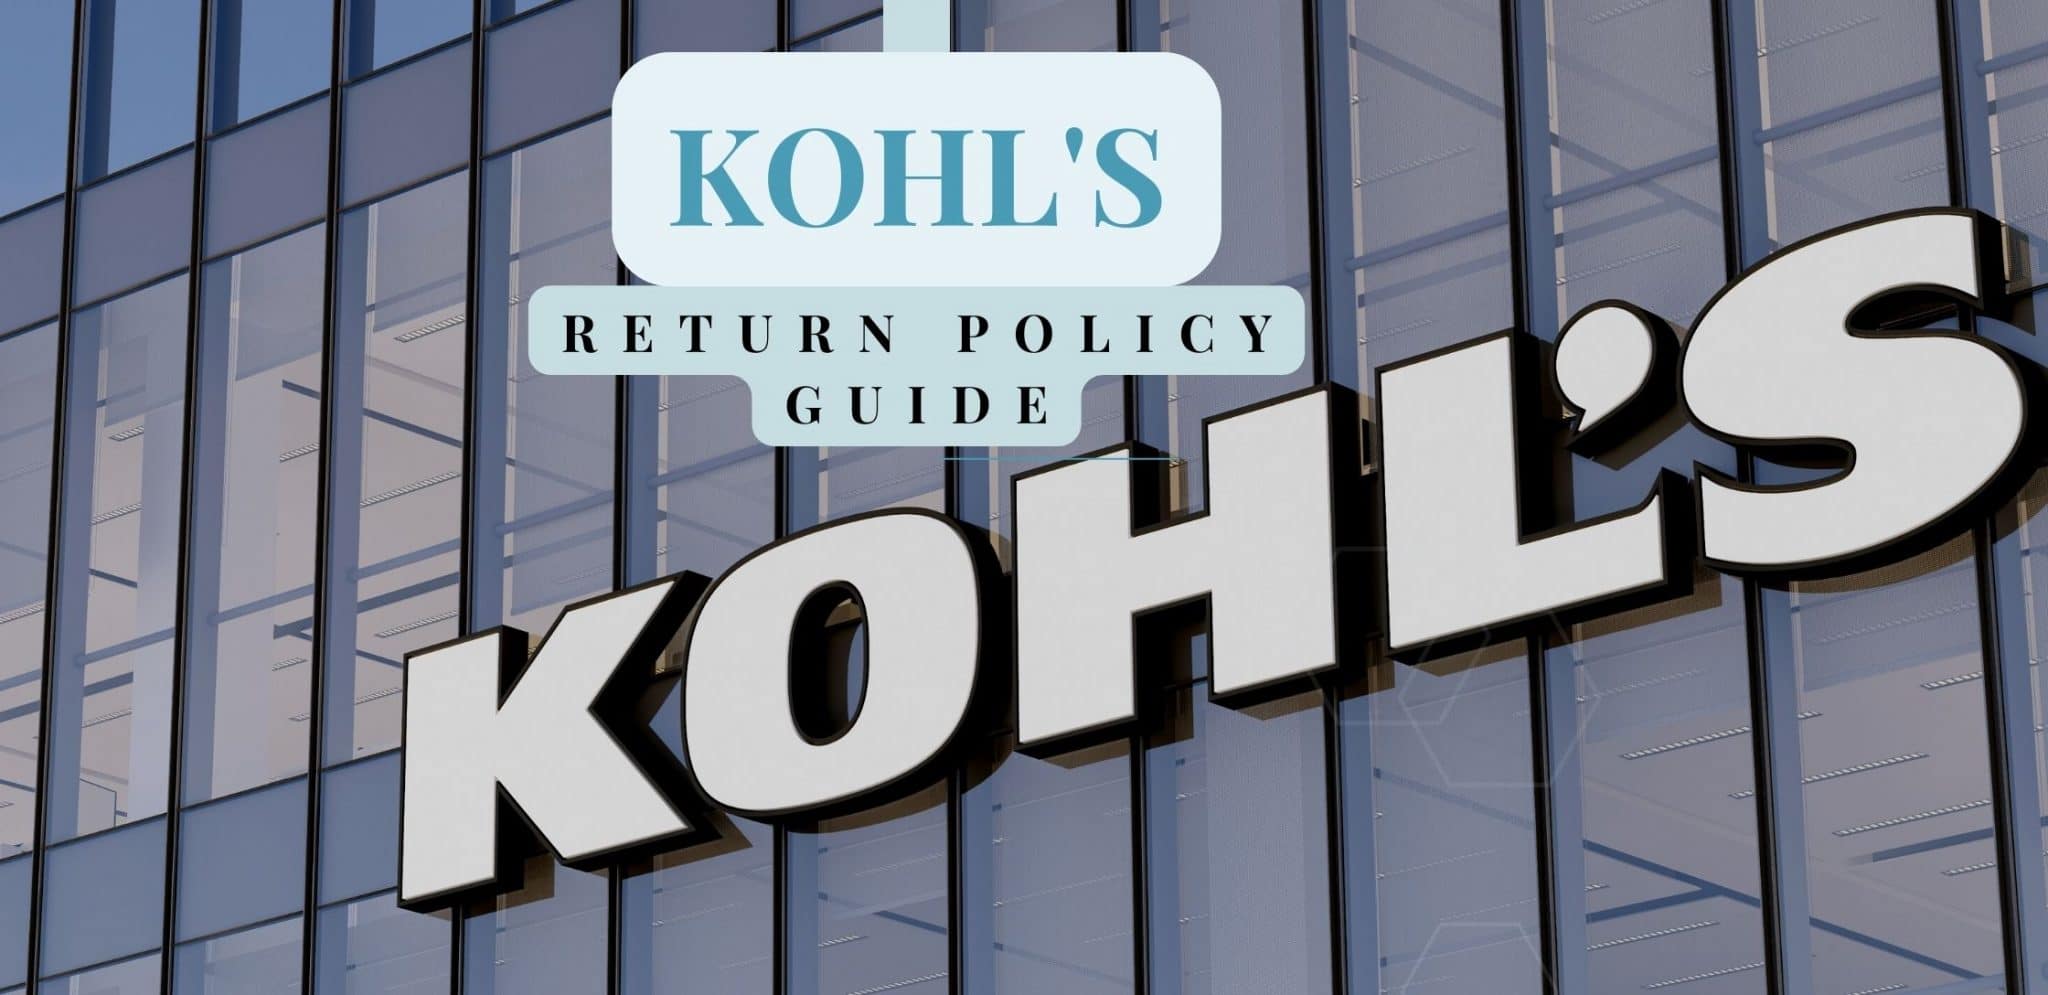 Kohl’s Return Policy Guide